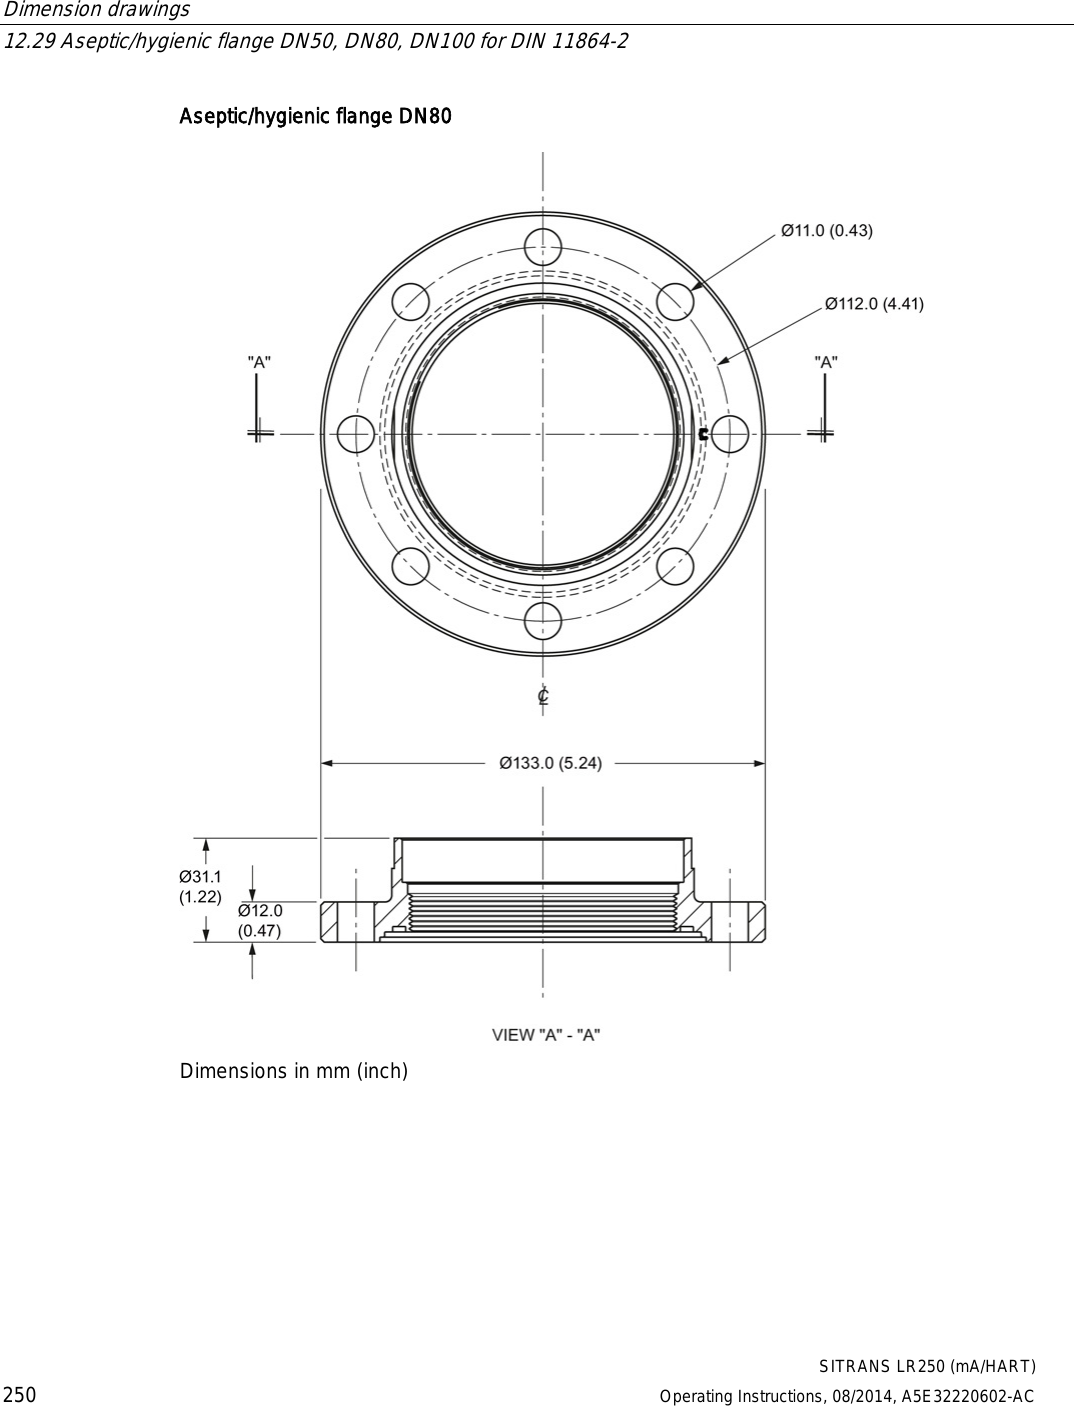 Dimension drawings   12.29 Aseptic/hygienic flange DN50, DN80, DN100 for DIN 11864-2  SITRANS LR250 (mA/HART) 250 Operating Instructions, 08/2014, A5E32220602-AC Aseptic/hygienic flange DN80  Dimensions in mm (inch) 